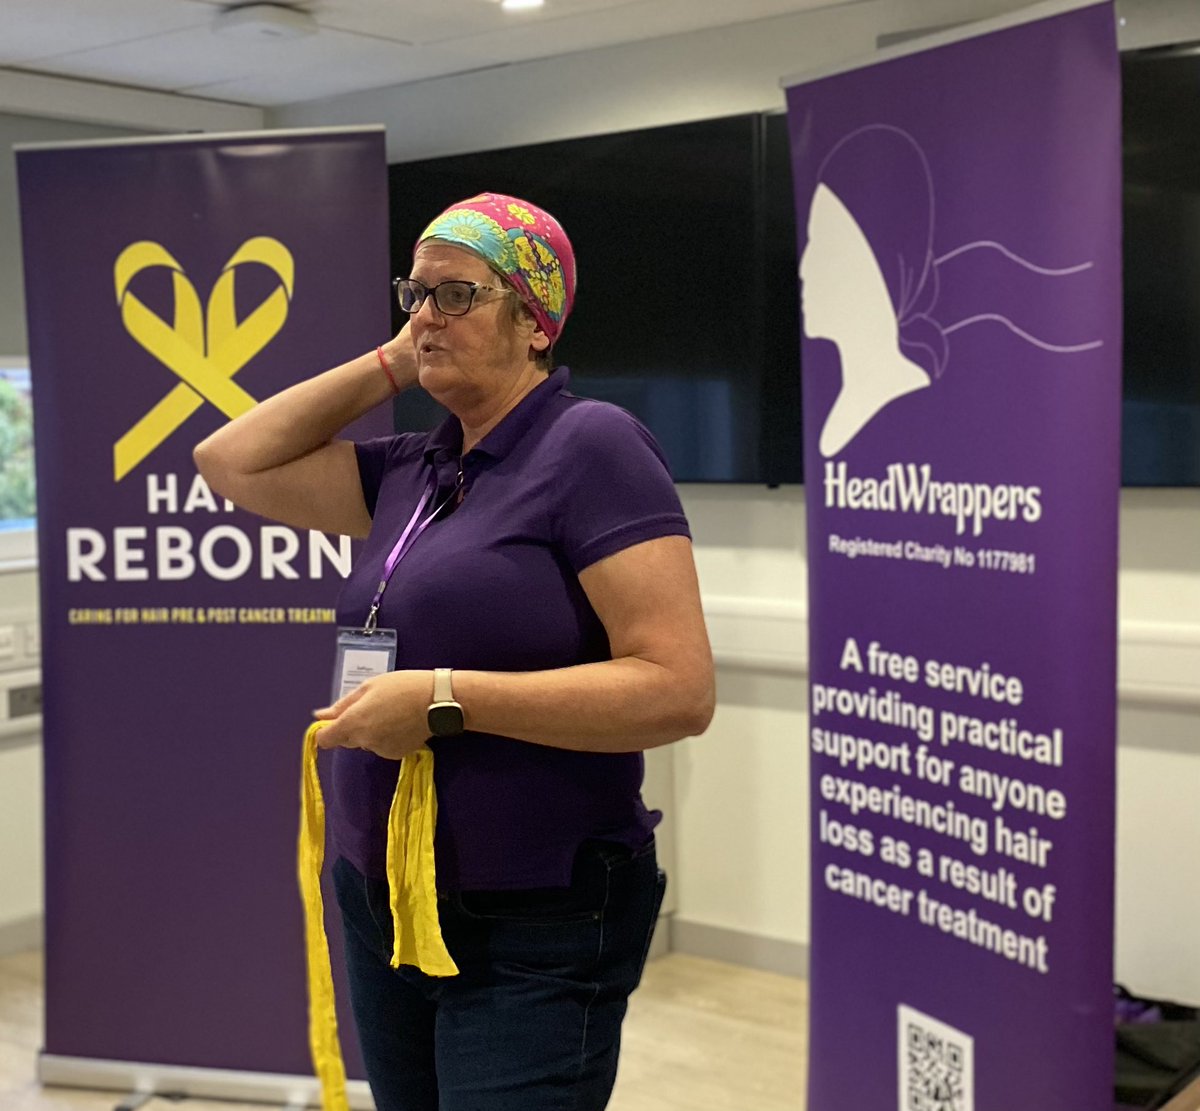 Thank you @HairRebornUK & @HeadWrappers teams for another amazing workshop supporting @StGeorgesTrust #cancer patients with advice on haircare & head wrapping skills when having/had #chemotherapy #personalisedcare #healthandwellbeing #PatientExperience Next event on 29th Jan